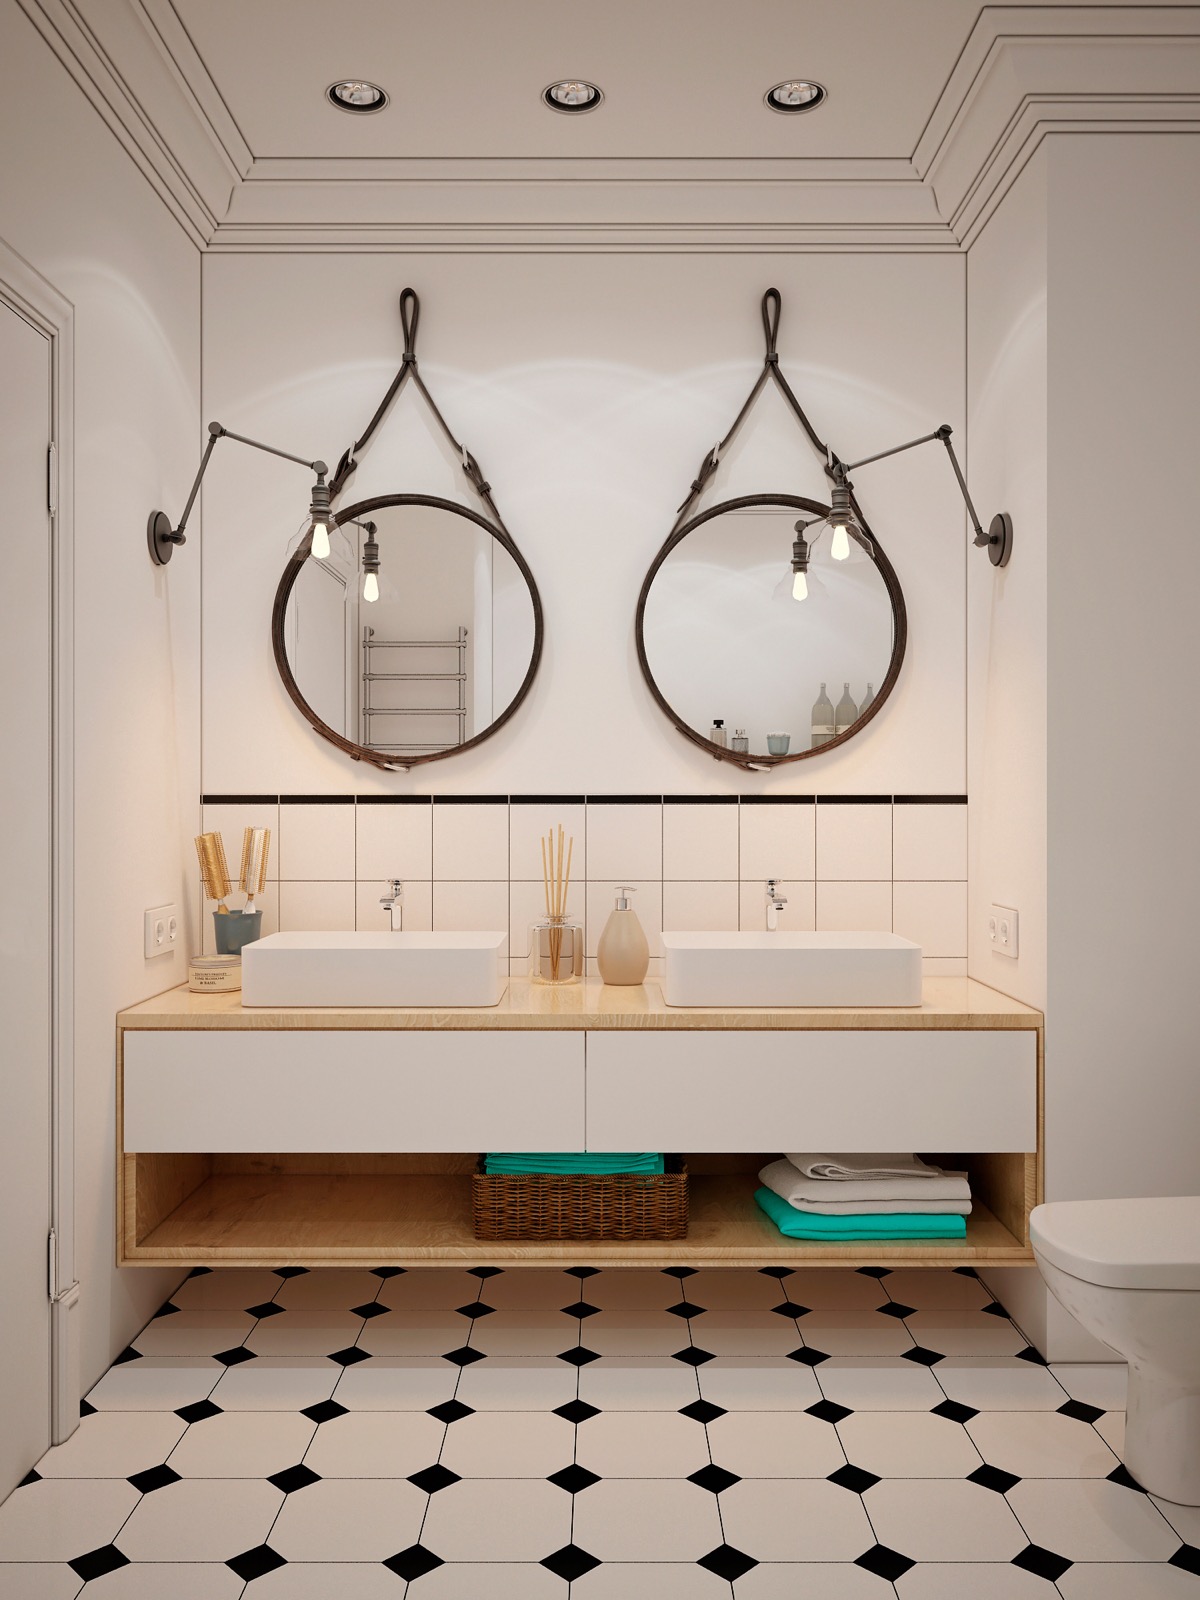 Create a Double Sink Concept in the Bathroom